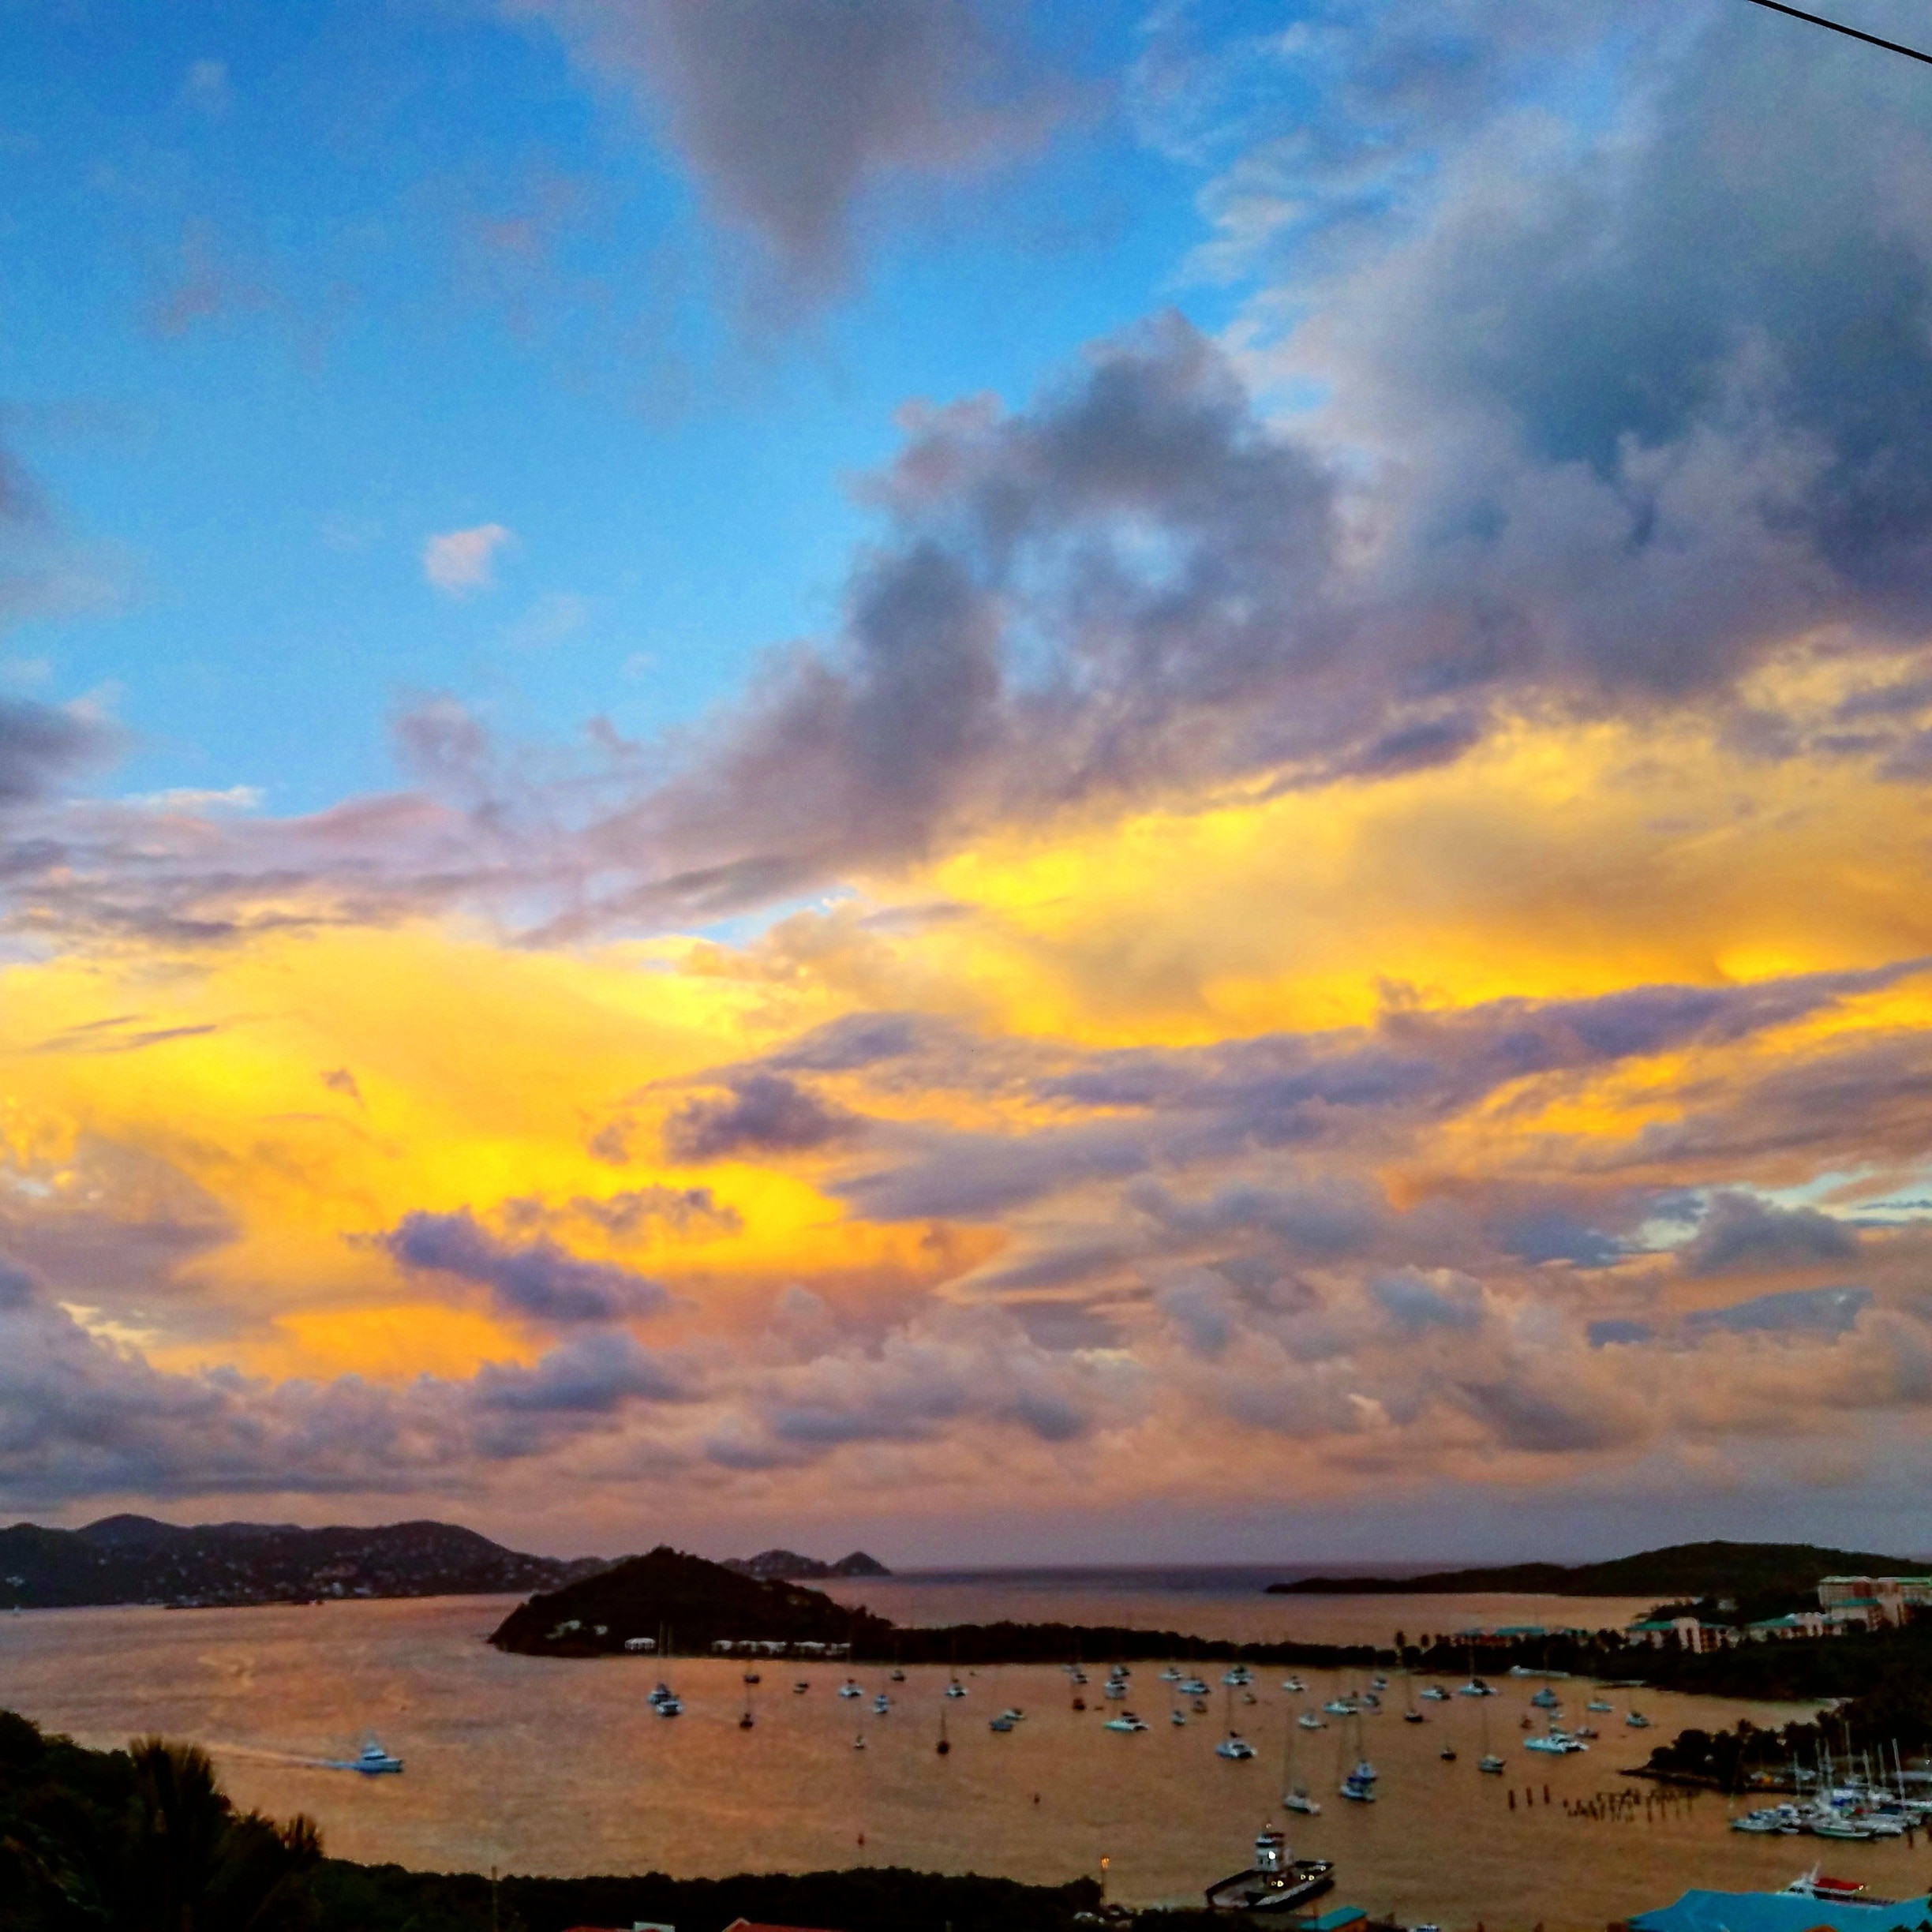 This view from my home in Redhook from my home in St Thomas never stops amazing me. Sunsets here are unbelievable